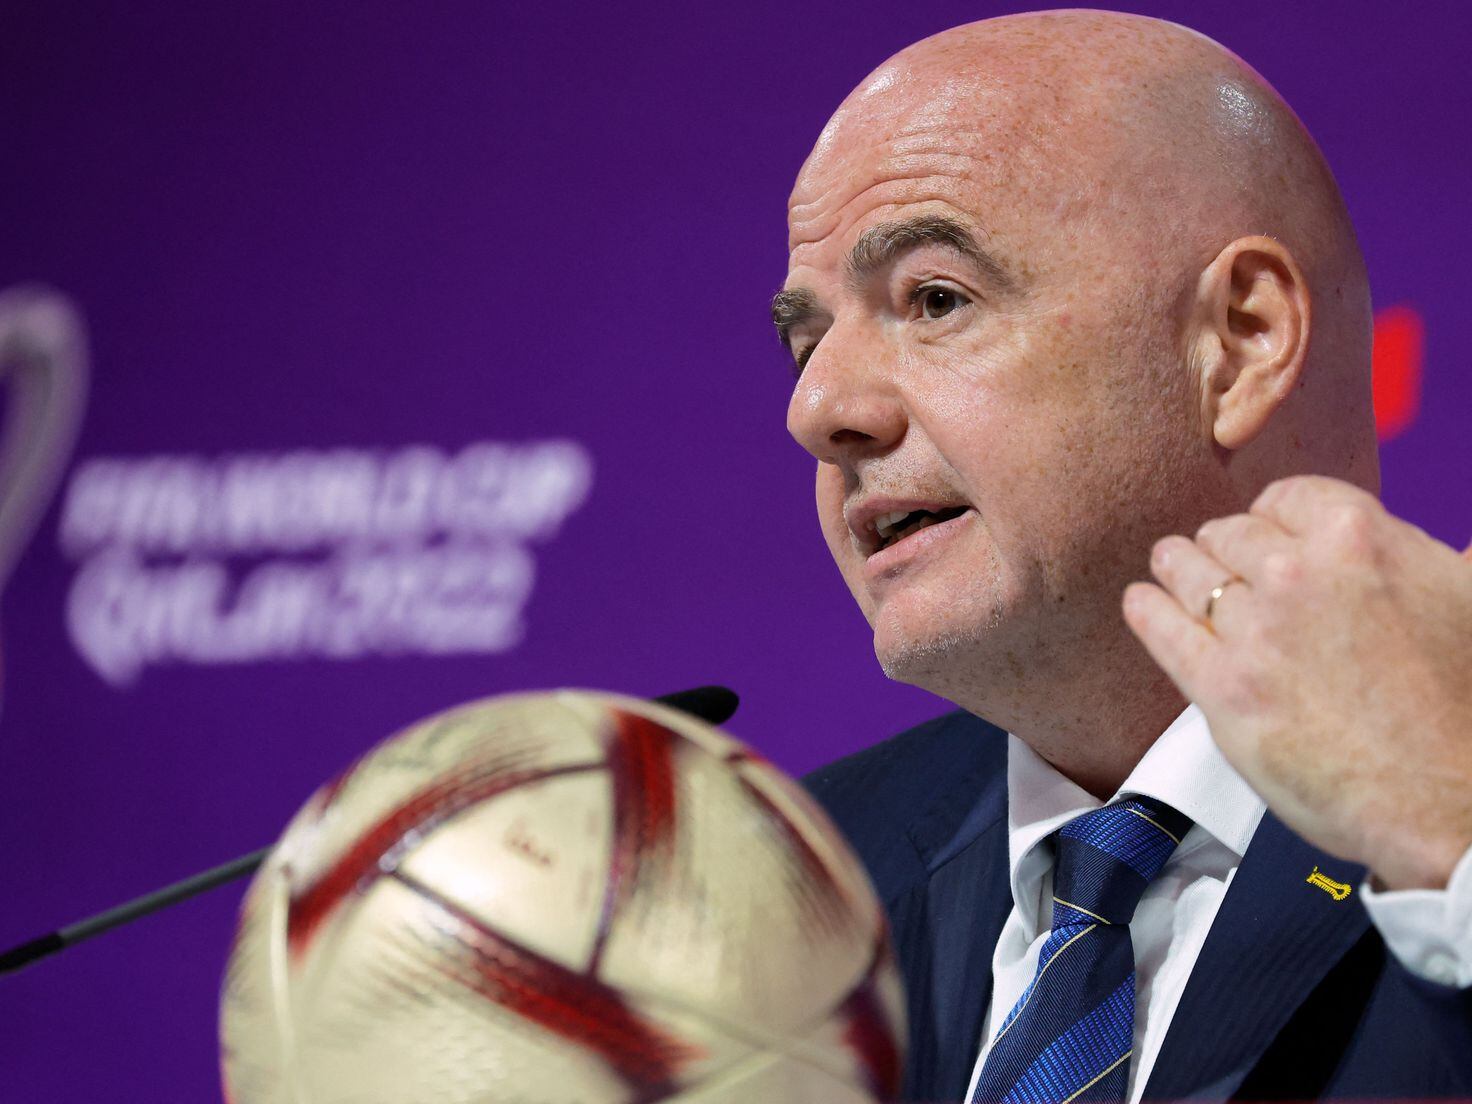 FIFA announces creation of a Women's Club World Cup, but there is